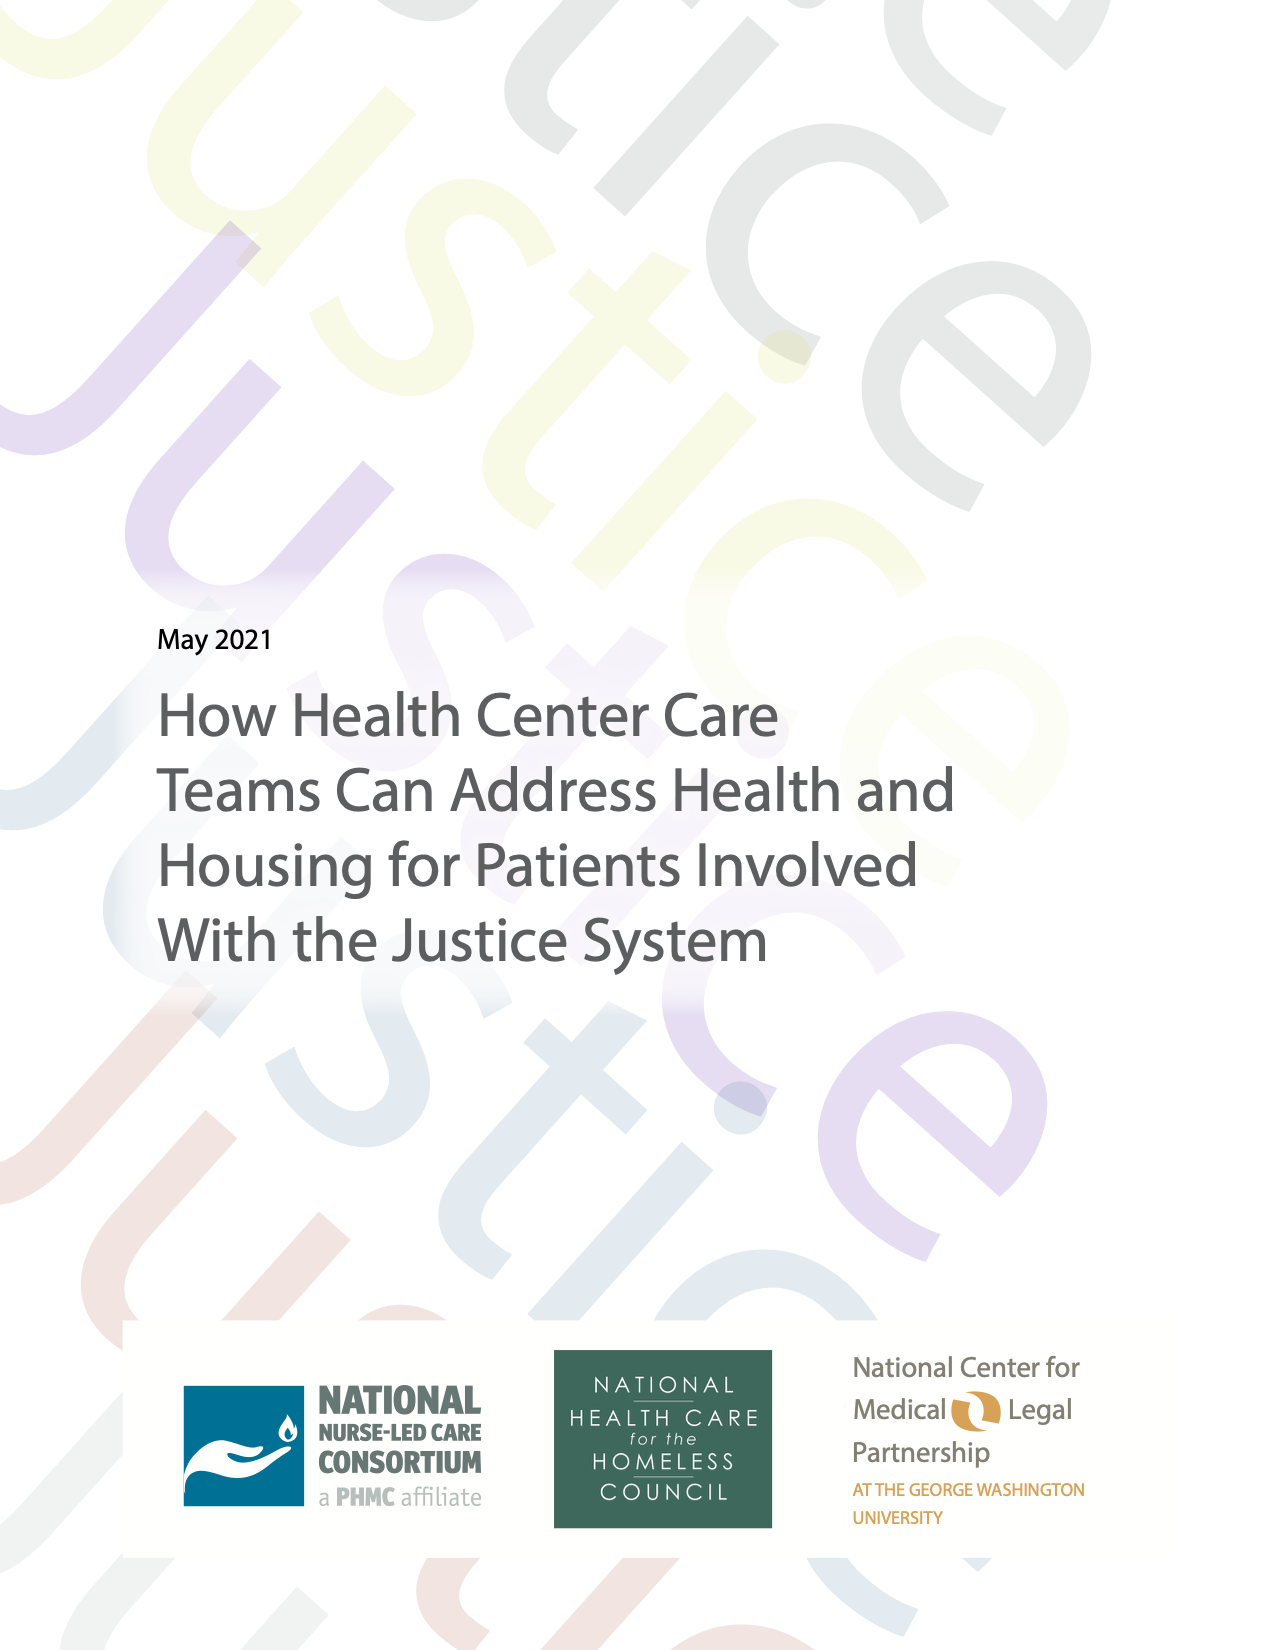 How Health Center Care Teams Can Address Health and Housing for Patients Involved With the Justice System